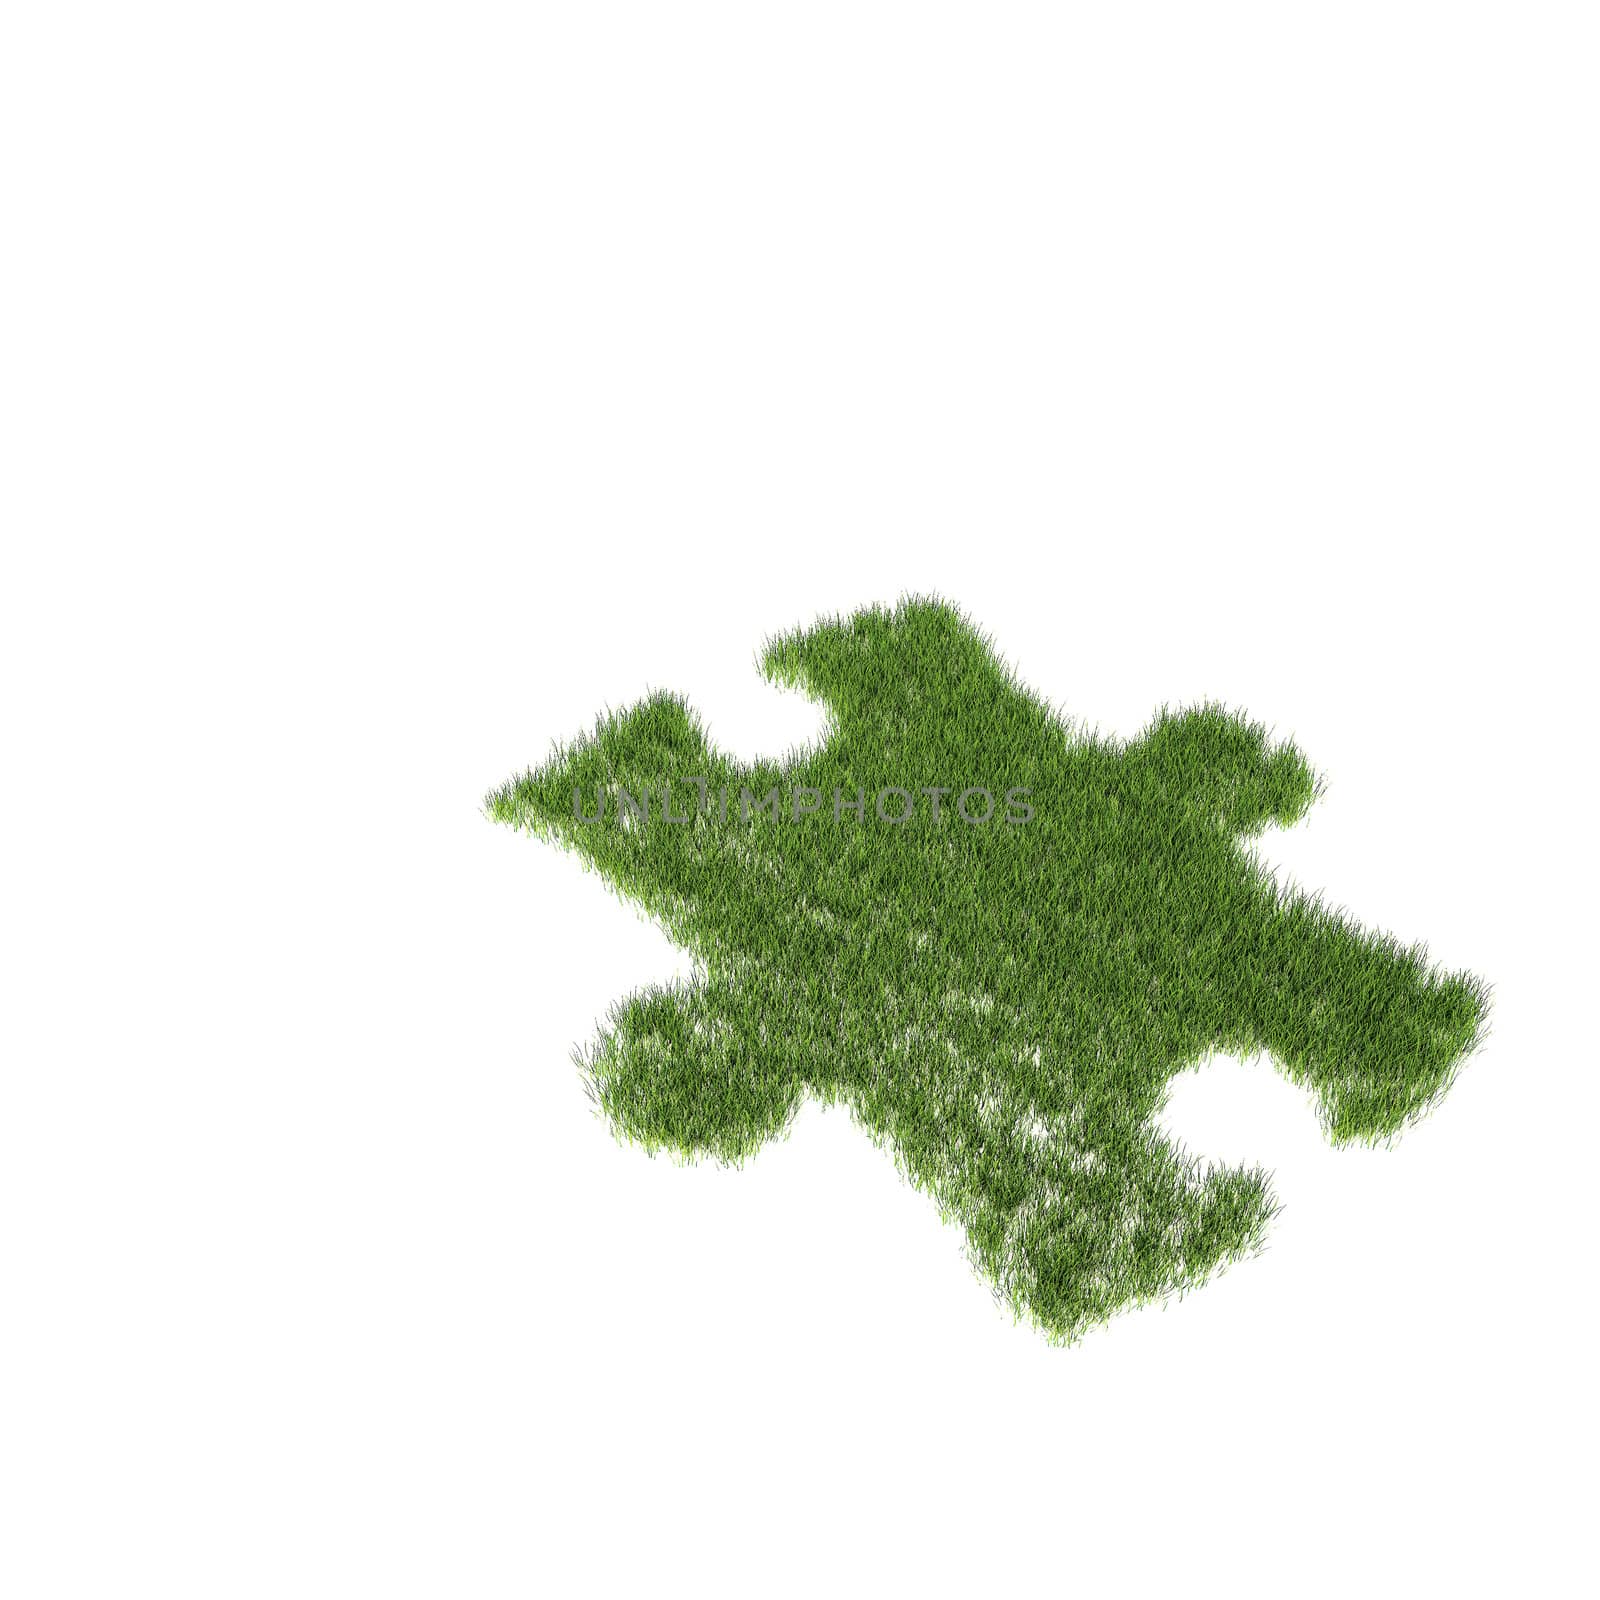 Green grass growing as a puzzle on a white background